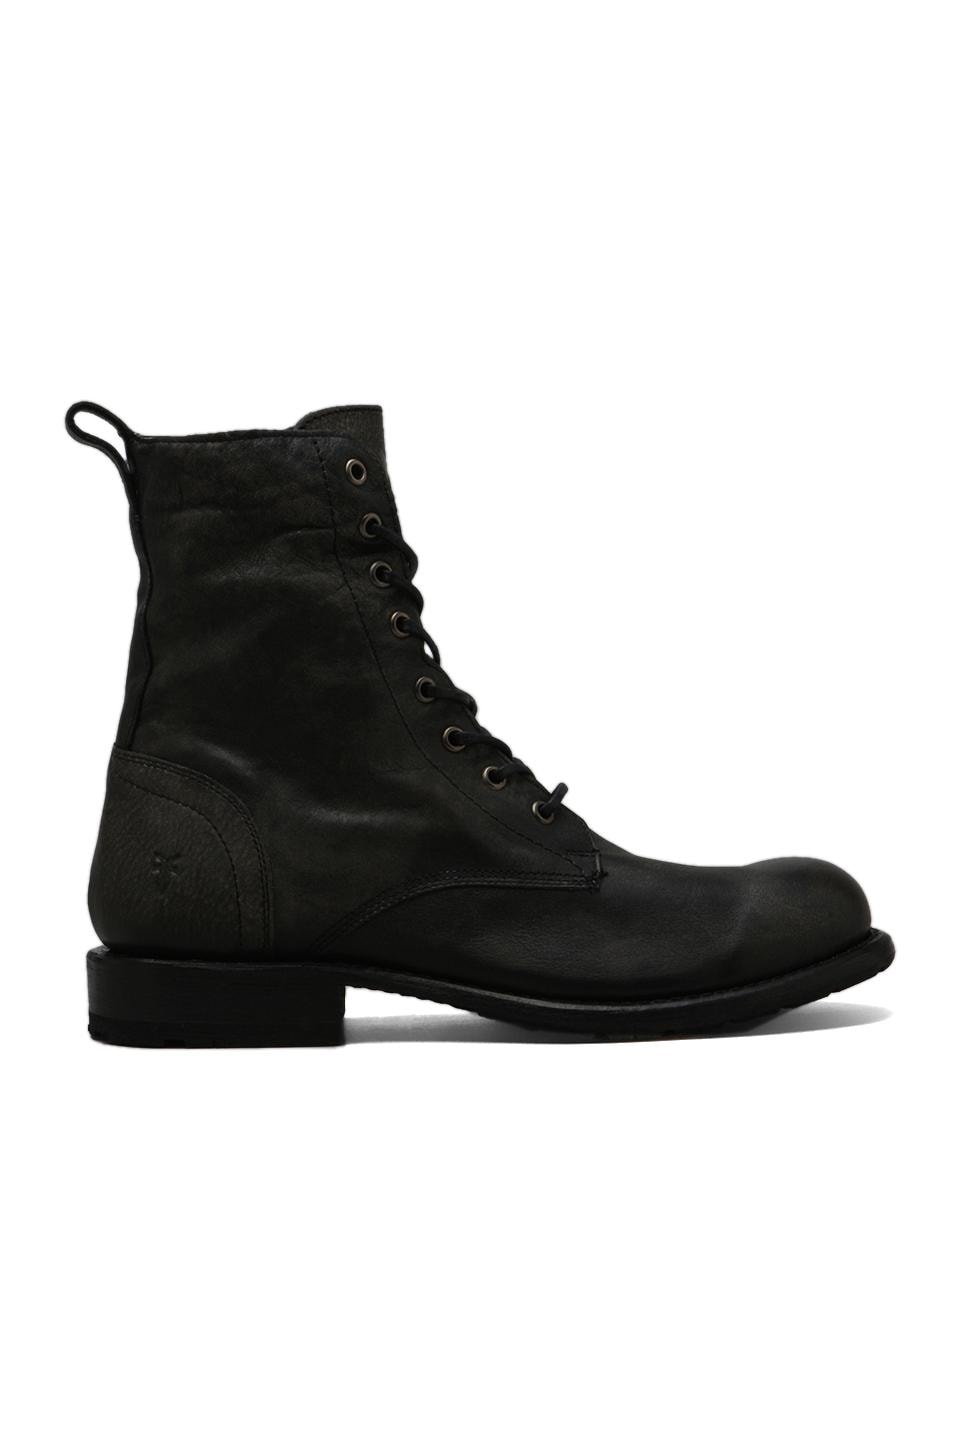 Frye Rogan Tall Lace Up Boot in Black 